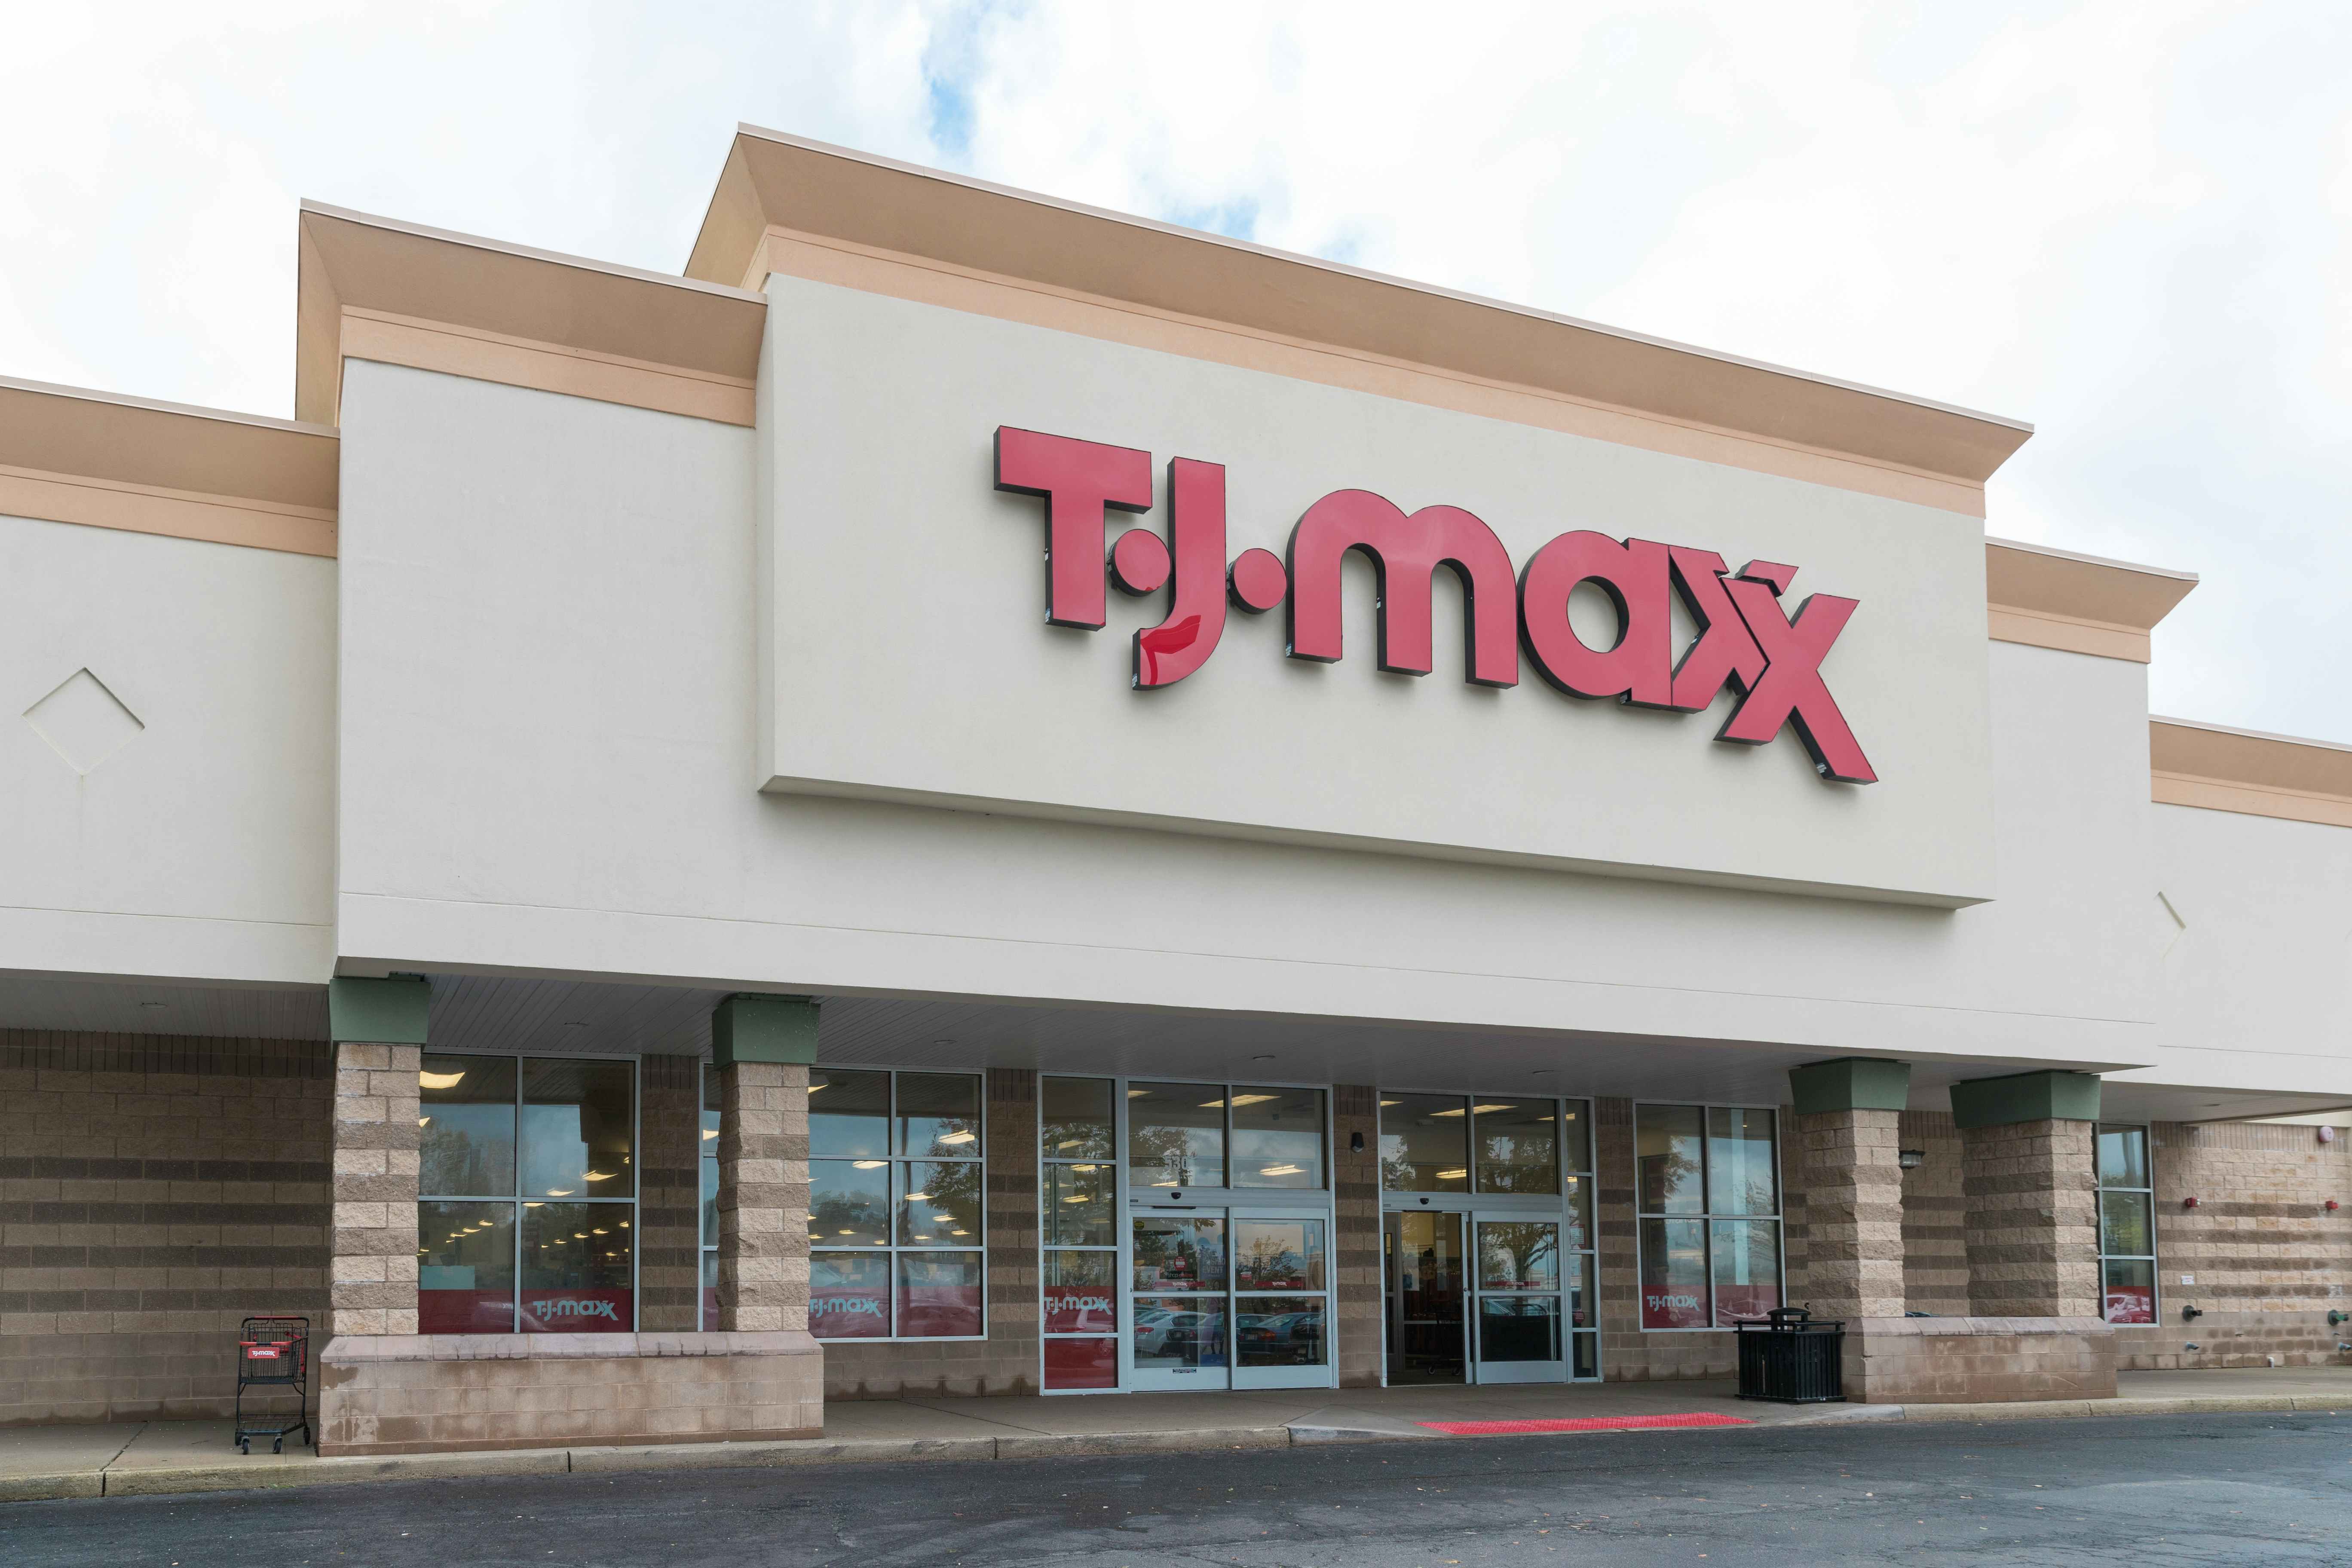 tj maxx bag sale,Save up to 19%